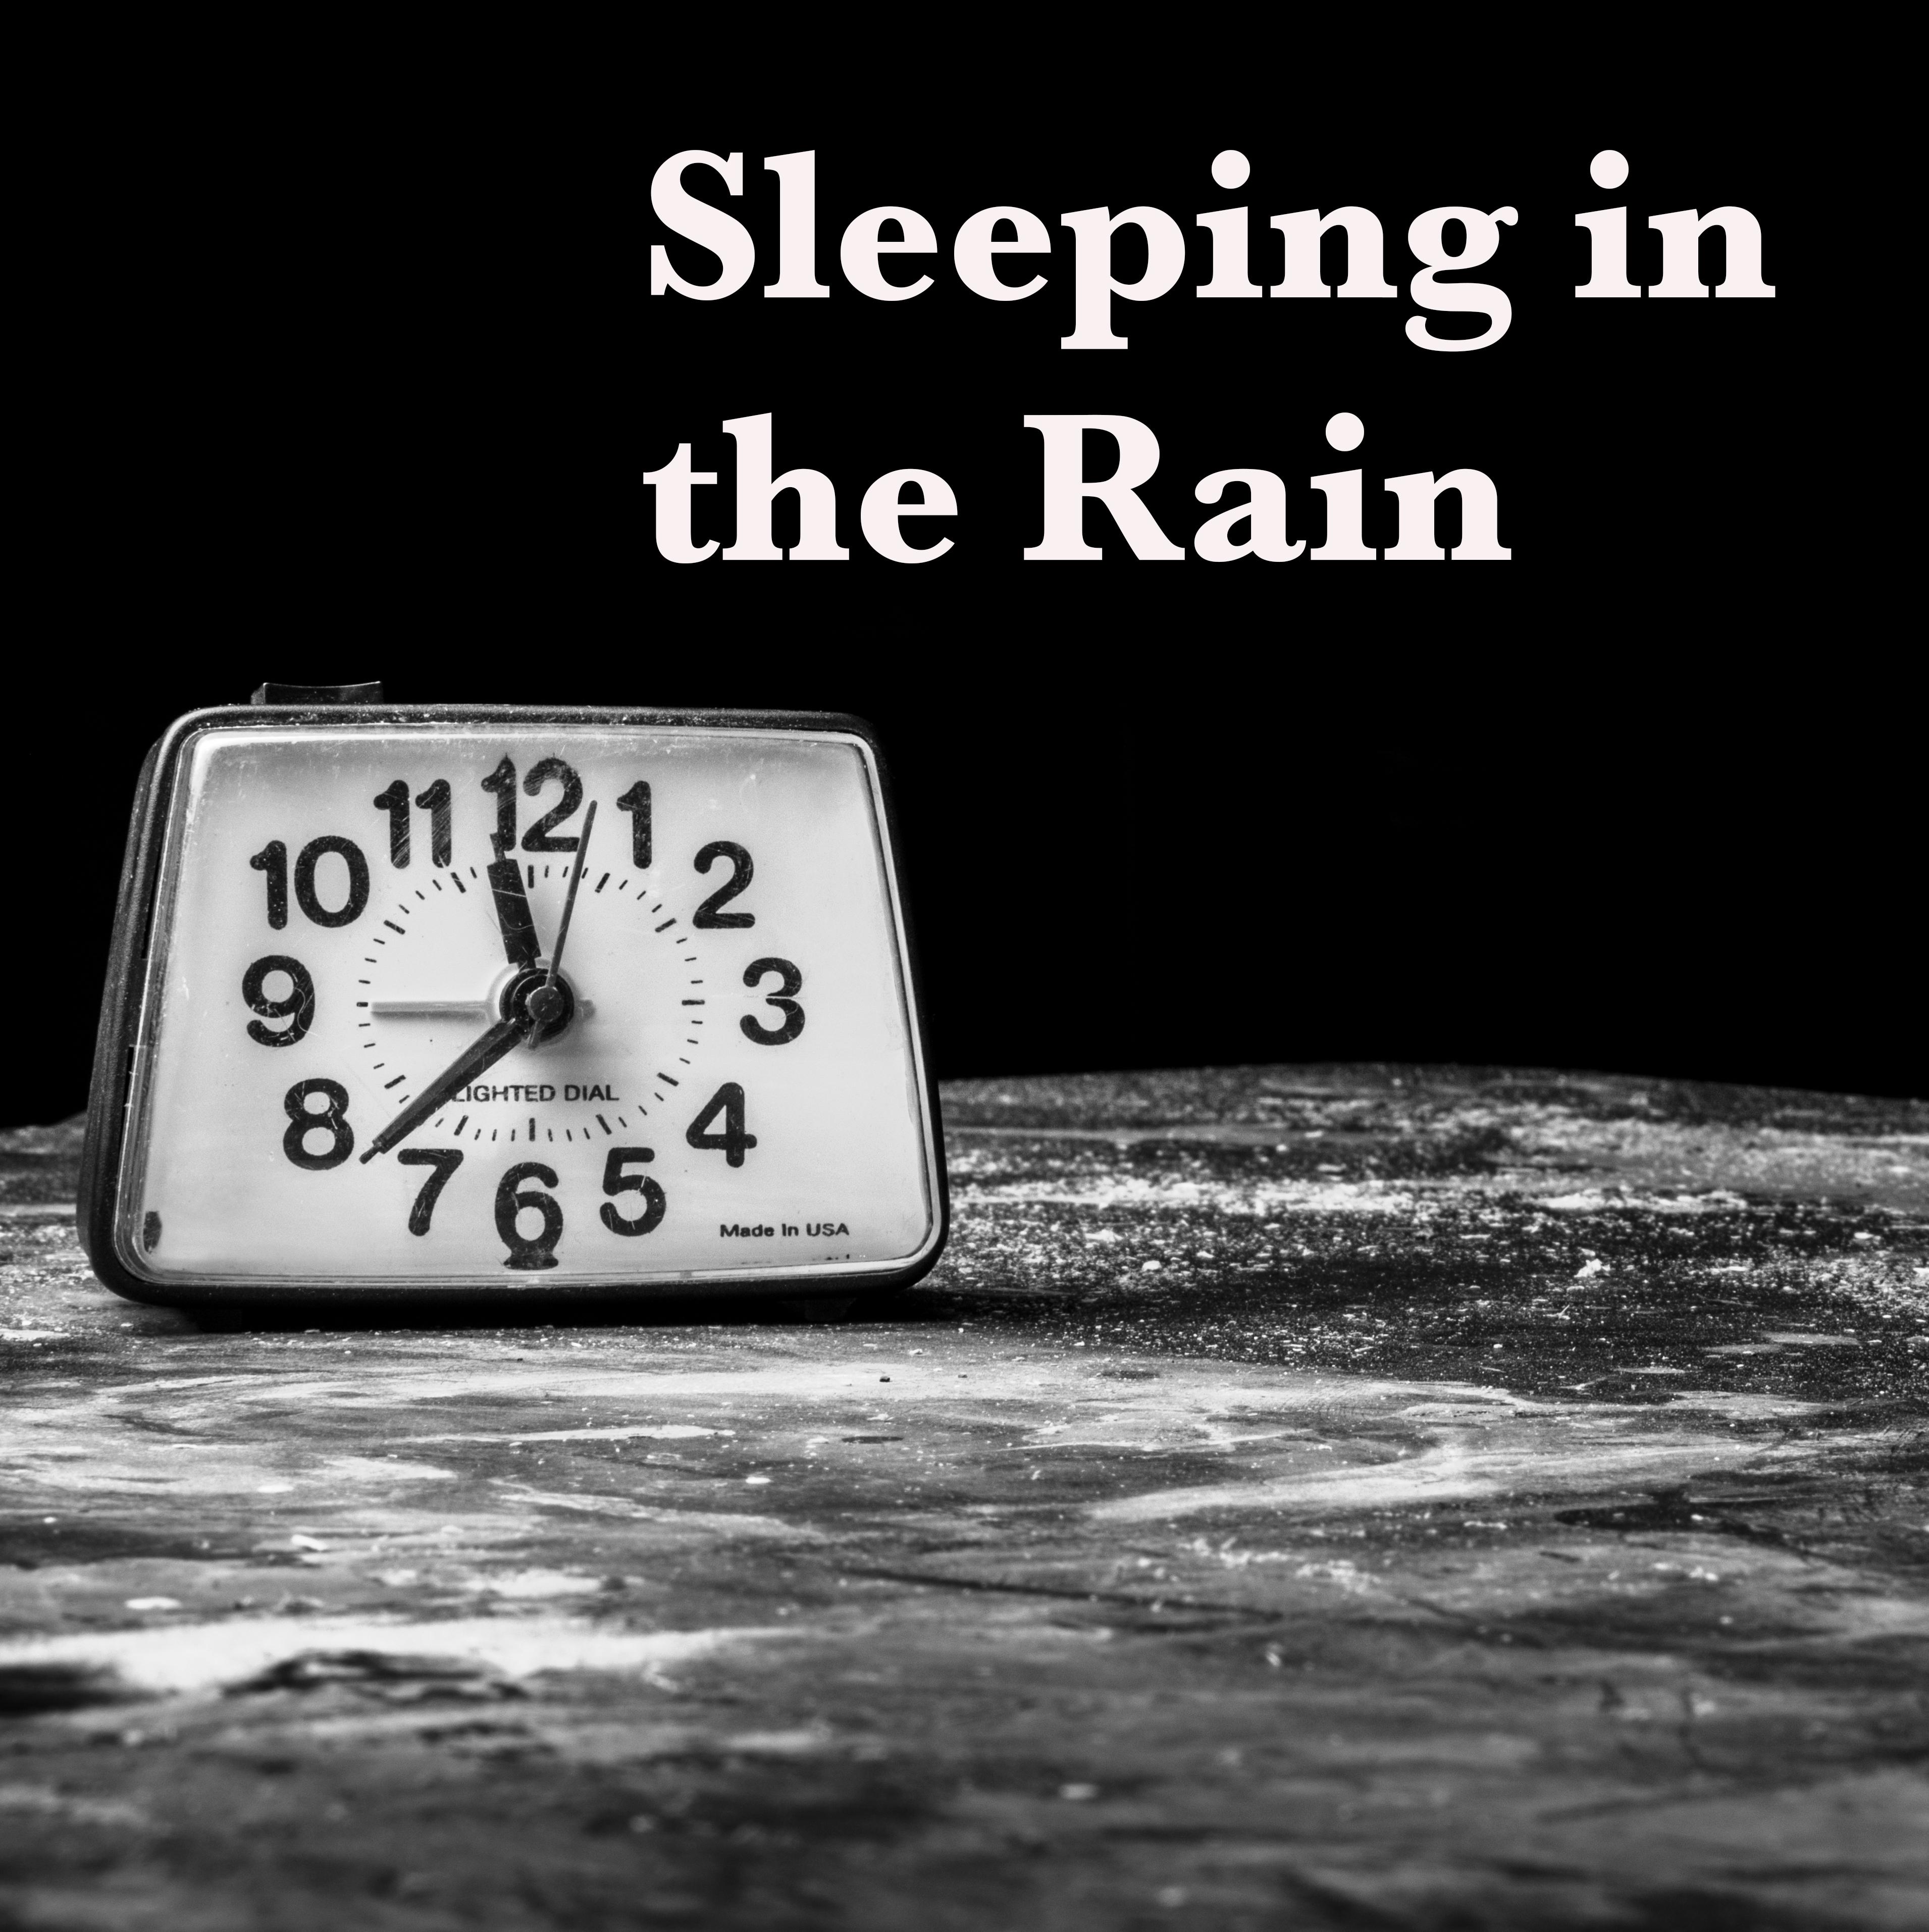 Sleeping in the Rain. Relaxing Rain Sounds for Sleeping. Loopable Rain Noise for Dreaming, Relaxation, Meditation, Insomnia, Ambience, Zen